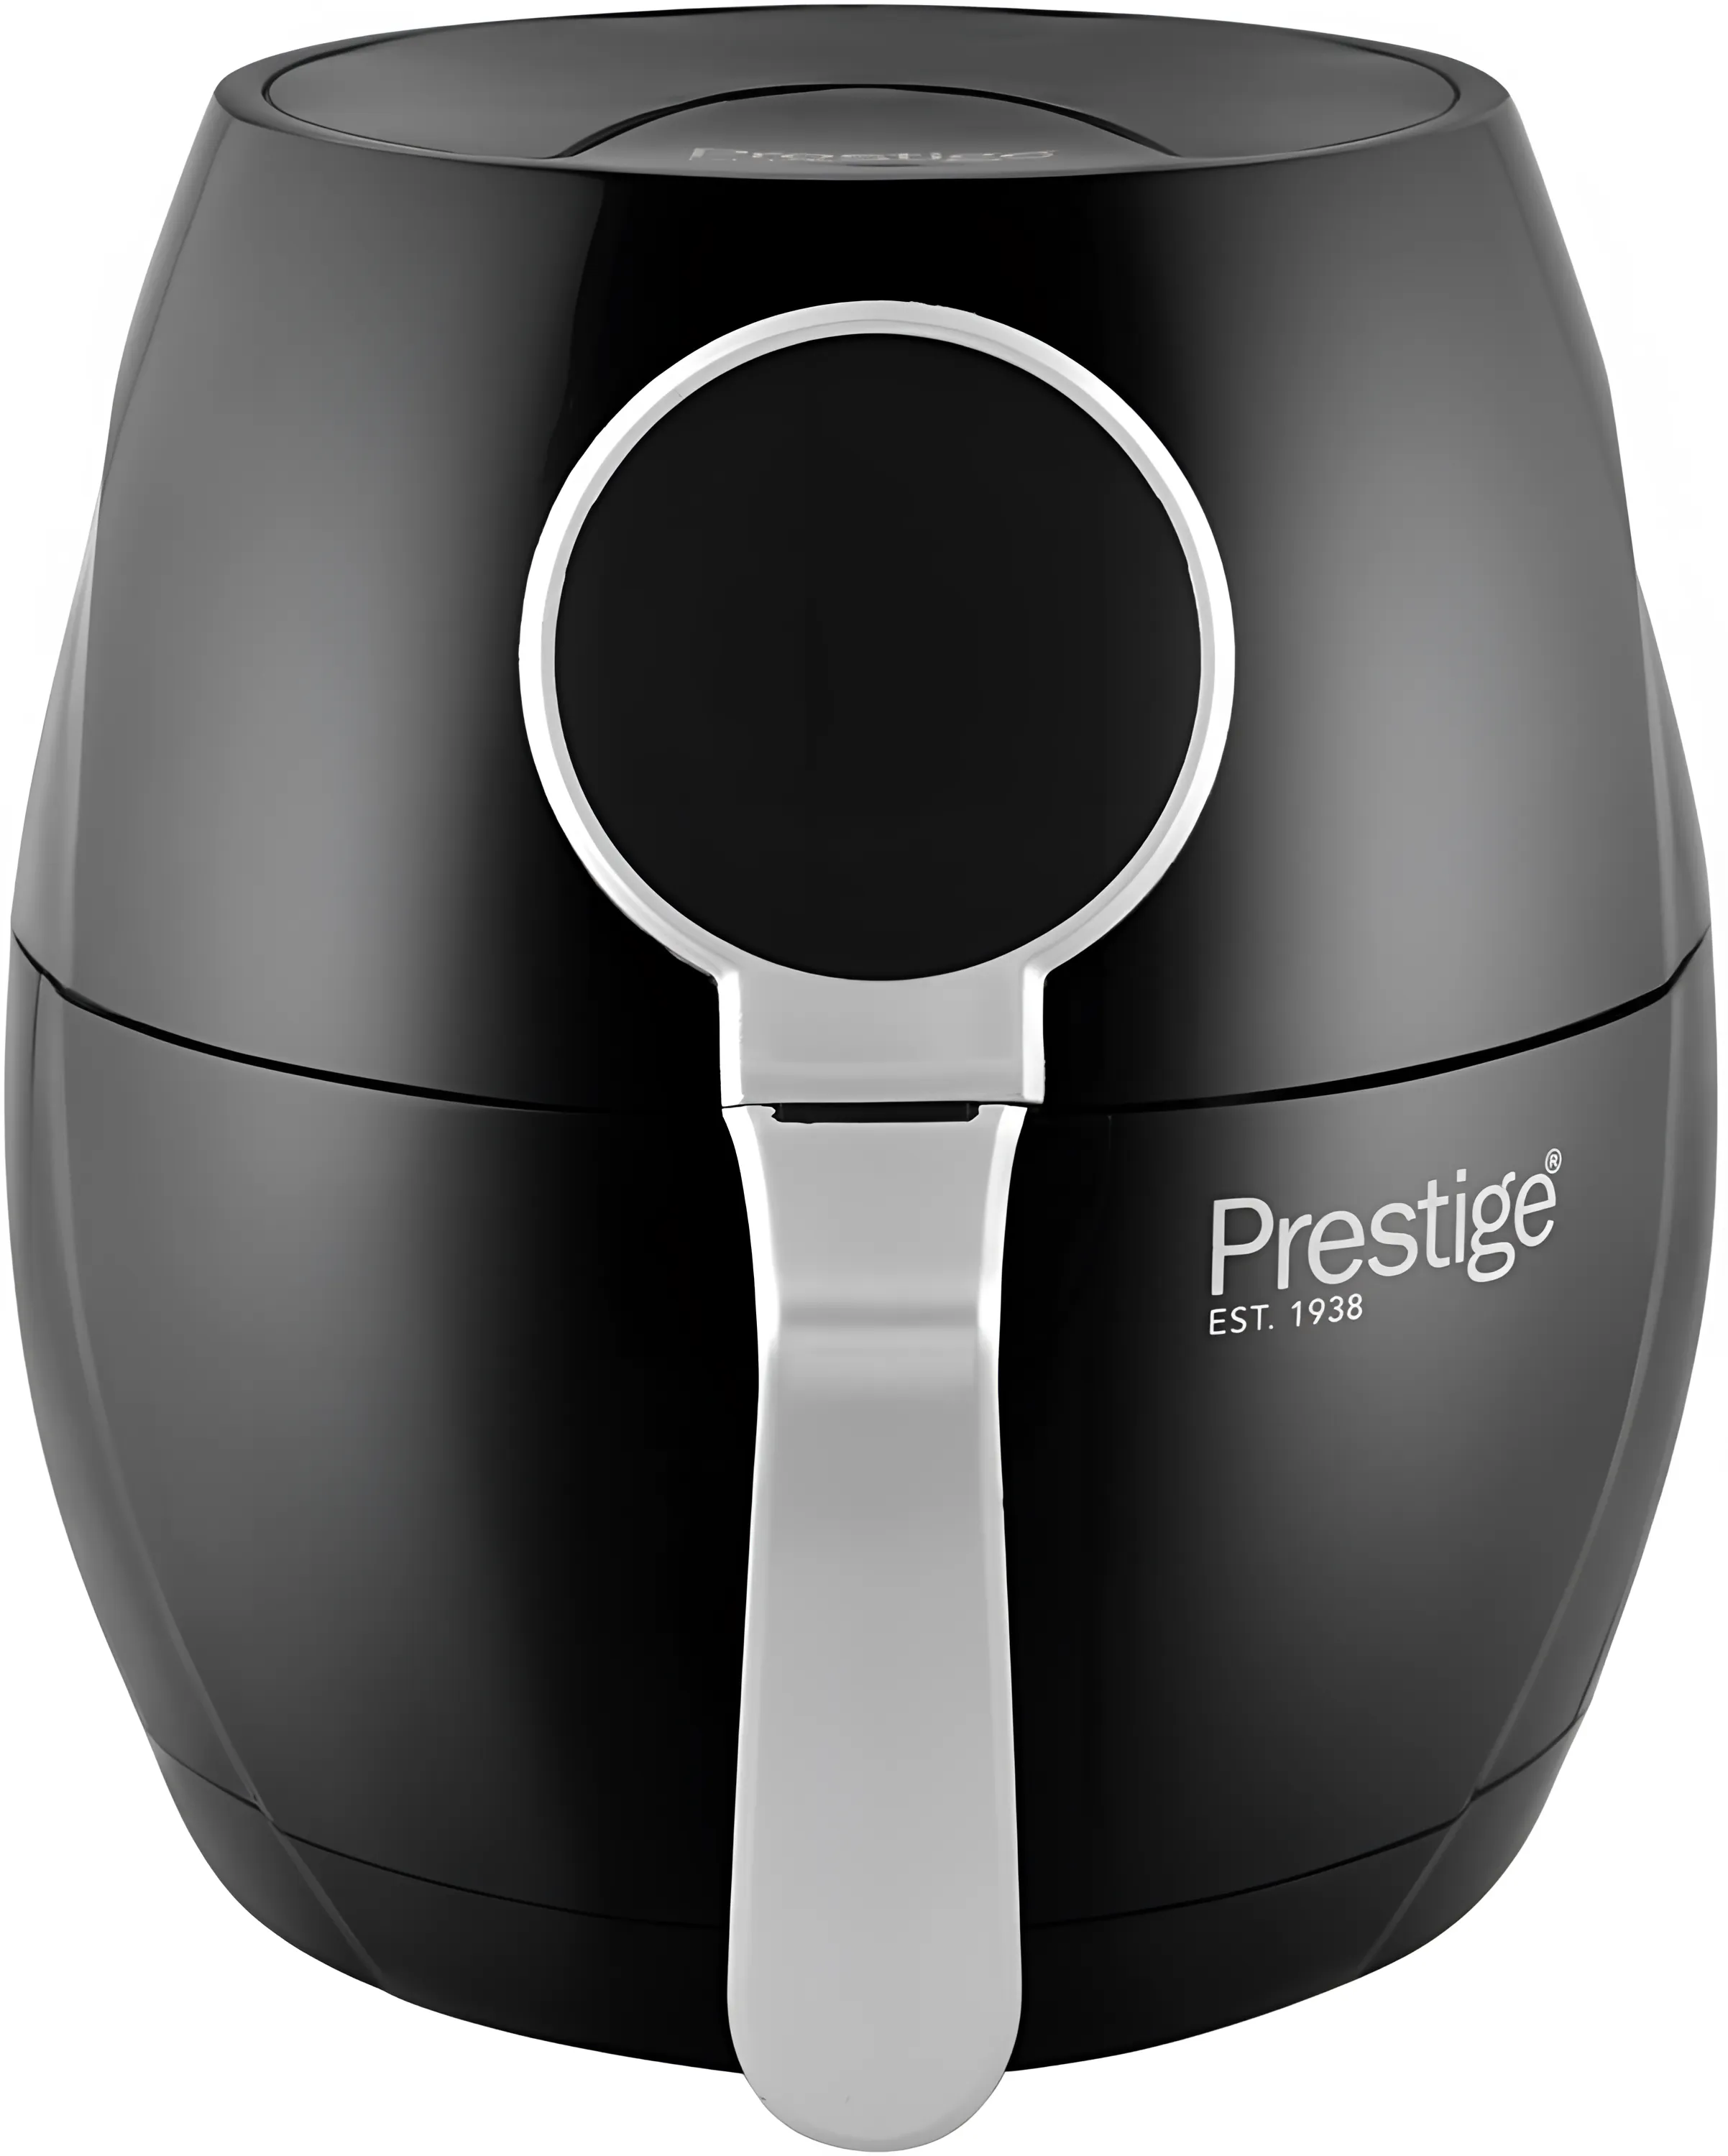 Prestige Energy Savings Air Fryer 1800 Watts XXL 5.5L Oil Free Best Air Fryer For Large Family Use Air Fryer for Grilling Broiling Roasting Baking & Toasting (Black)